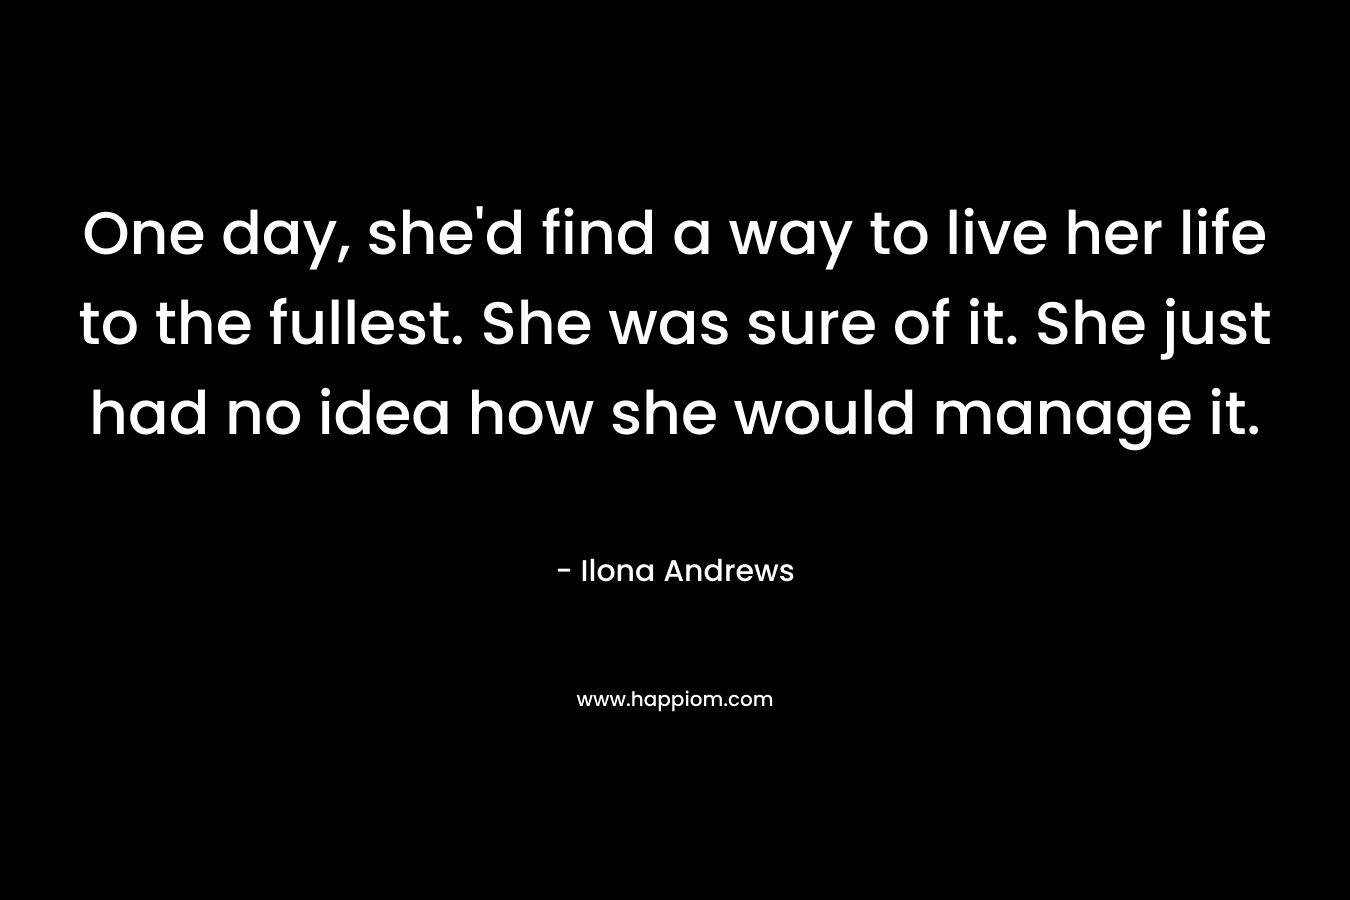 One day, she’d find a way to live her life to the fullest. She was sure of it. She just had no idea how she would manage it. – Ilona Andrews